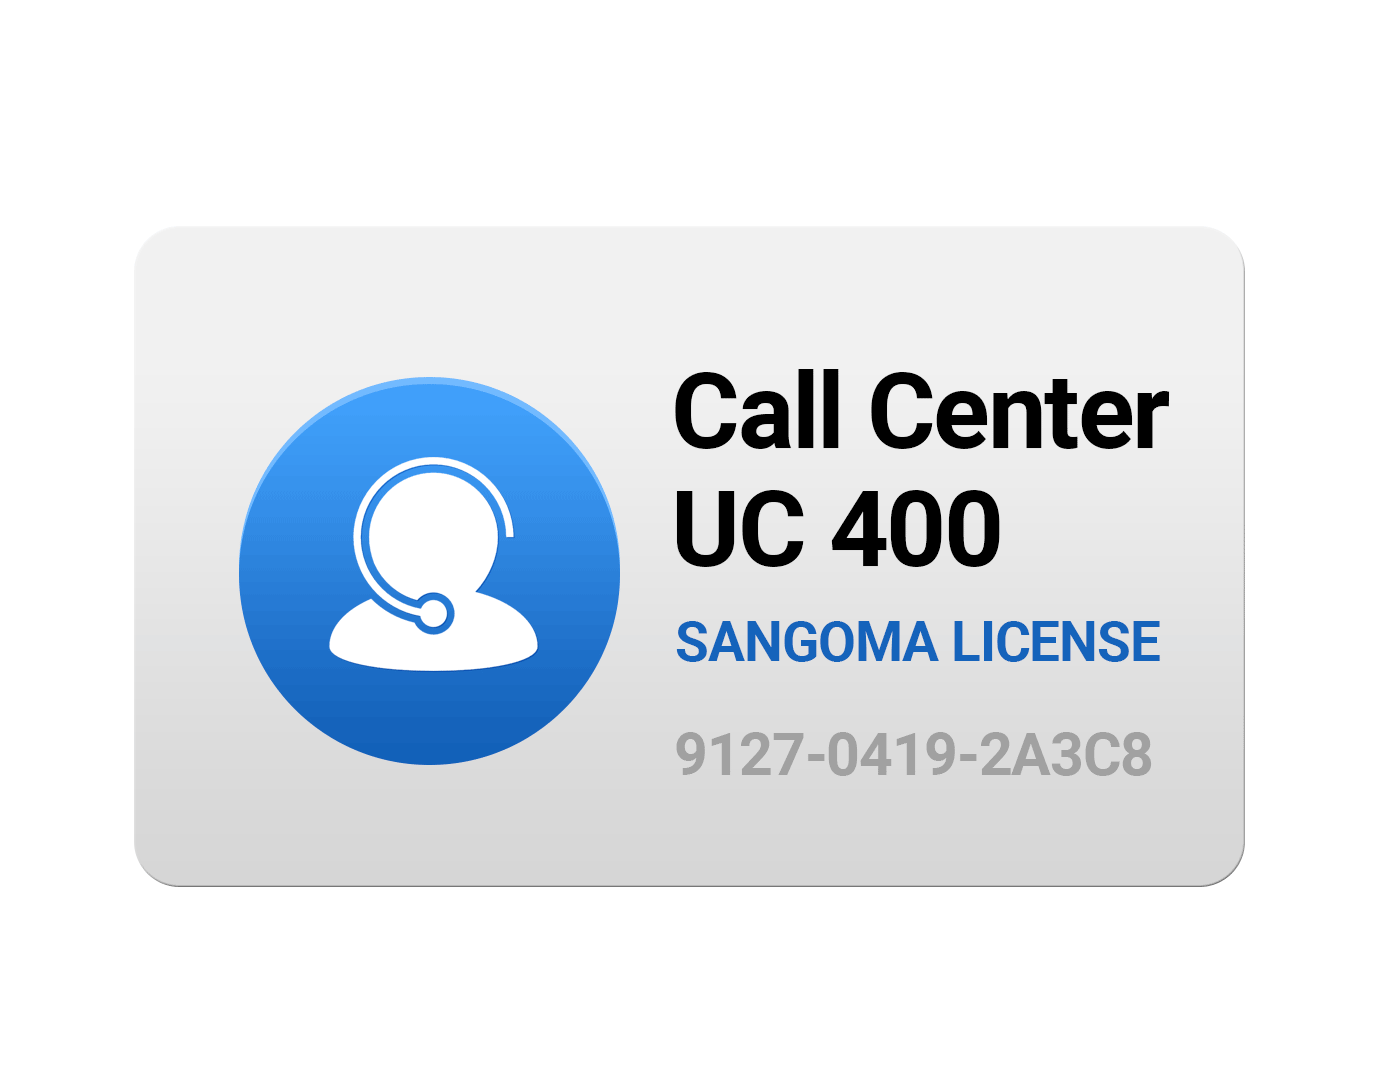 Call Center Features License for UC 400